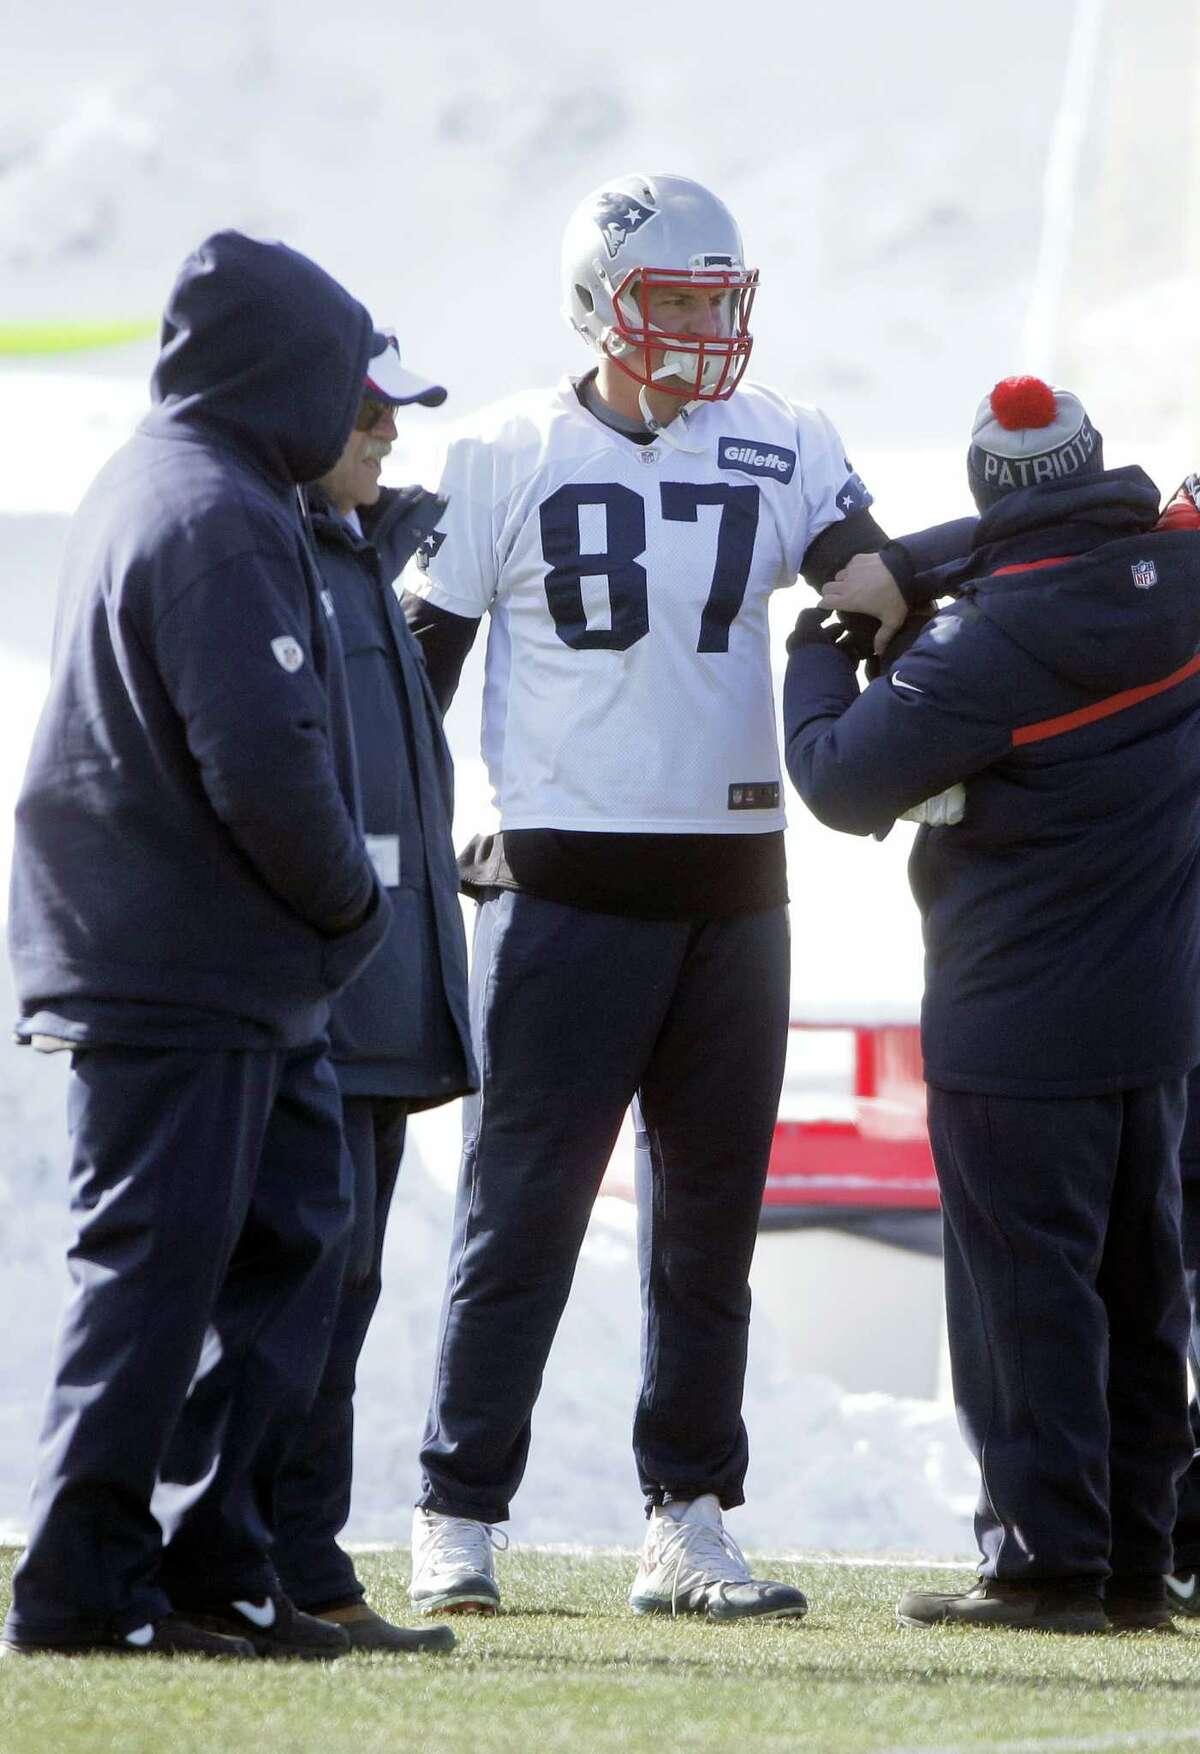 New England Patriots tight end Rob Gronkowski, center, has his arm tended to during practice on Wednesday.